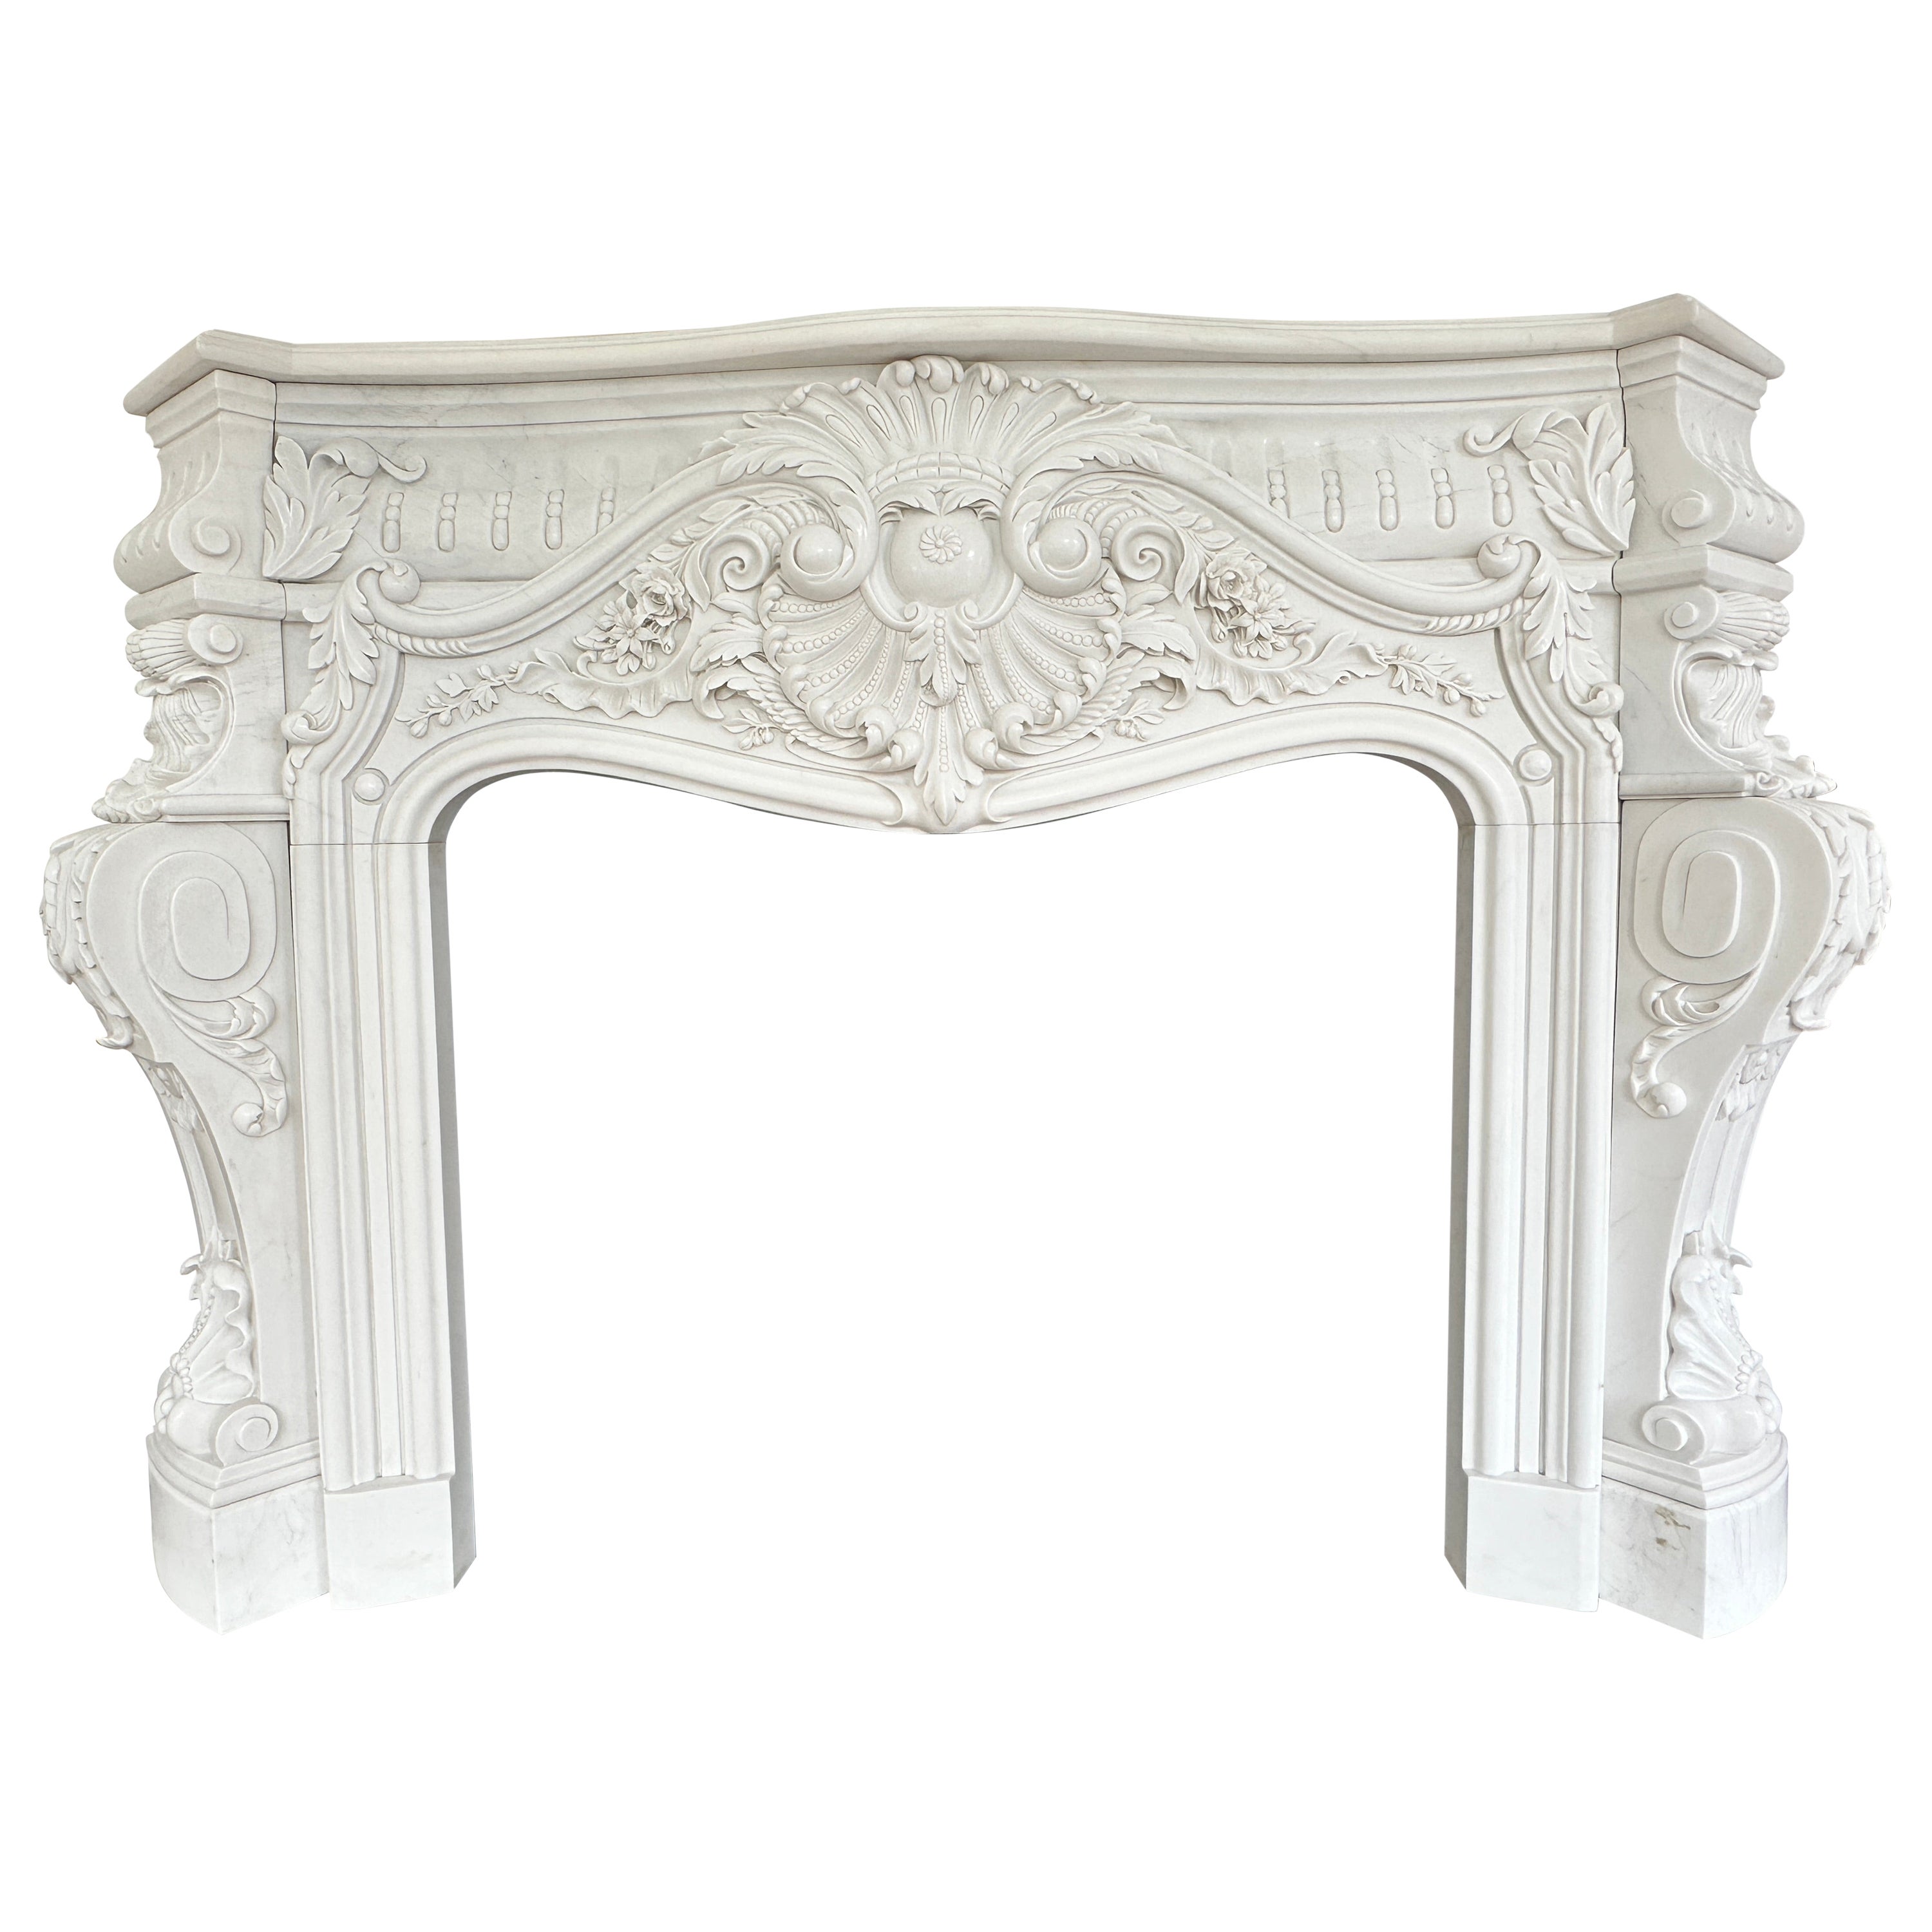 A Very large Reclaimed French Rococo White Marble Fireplace For Sale